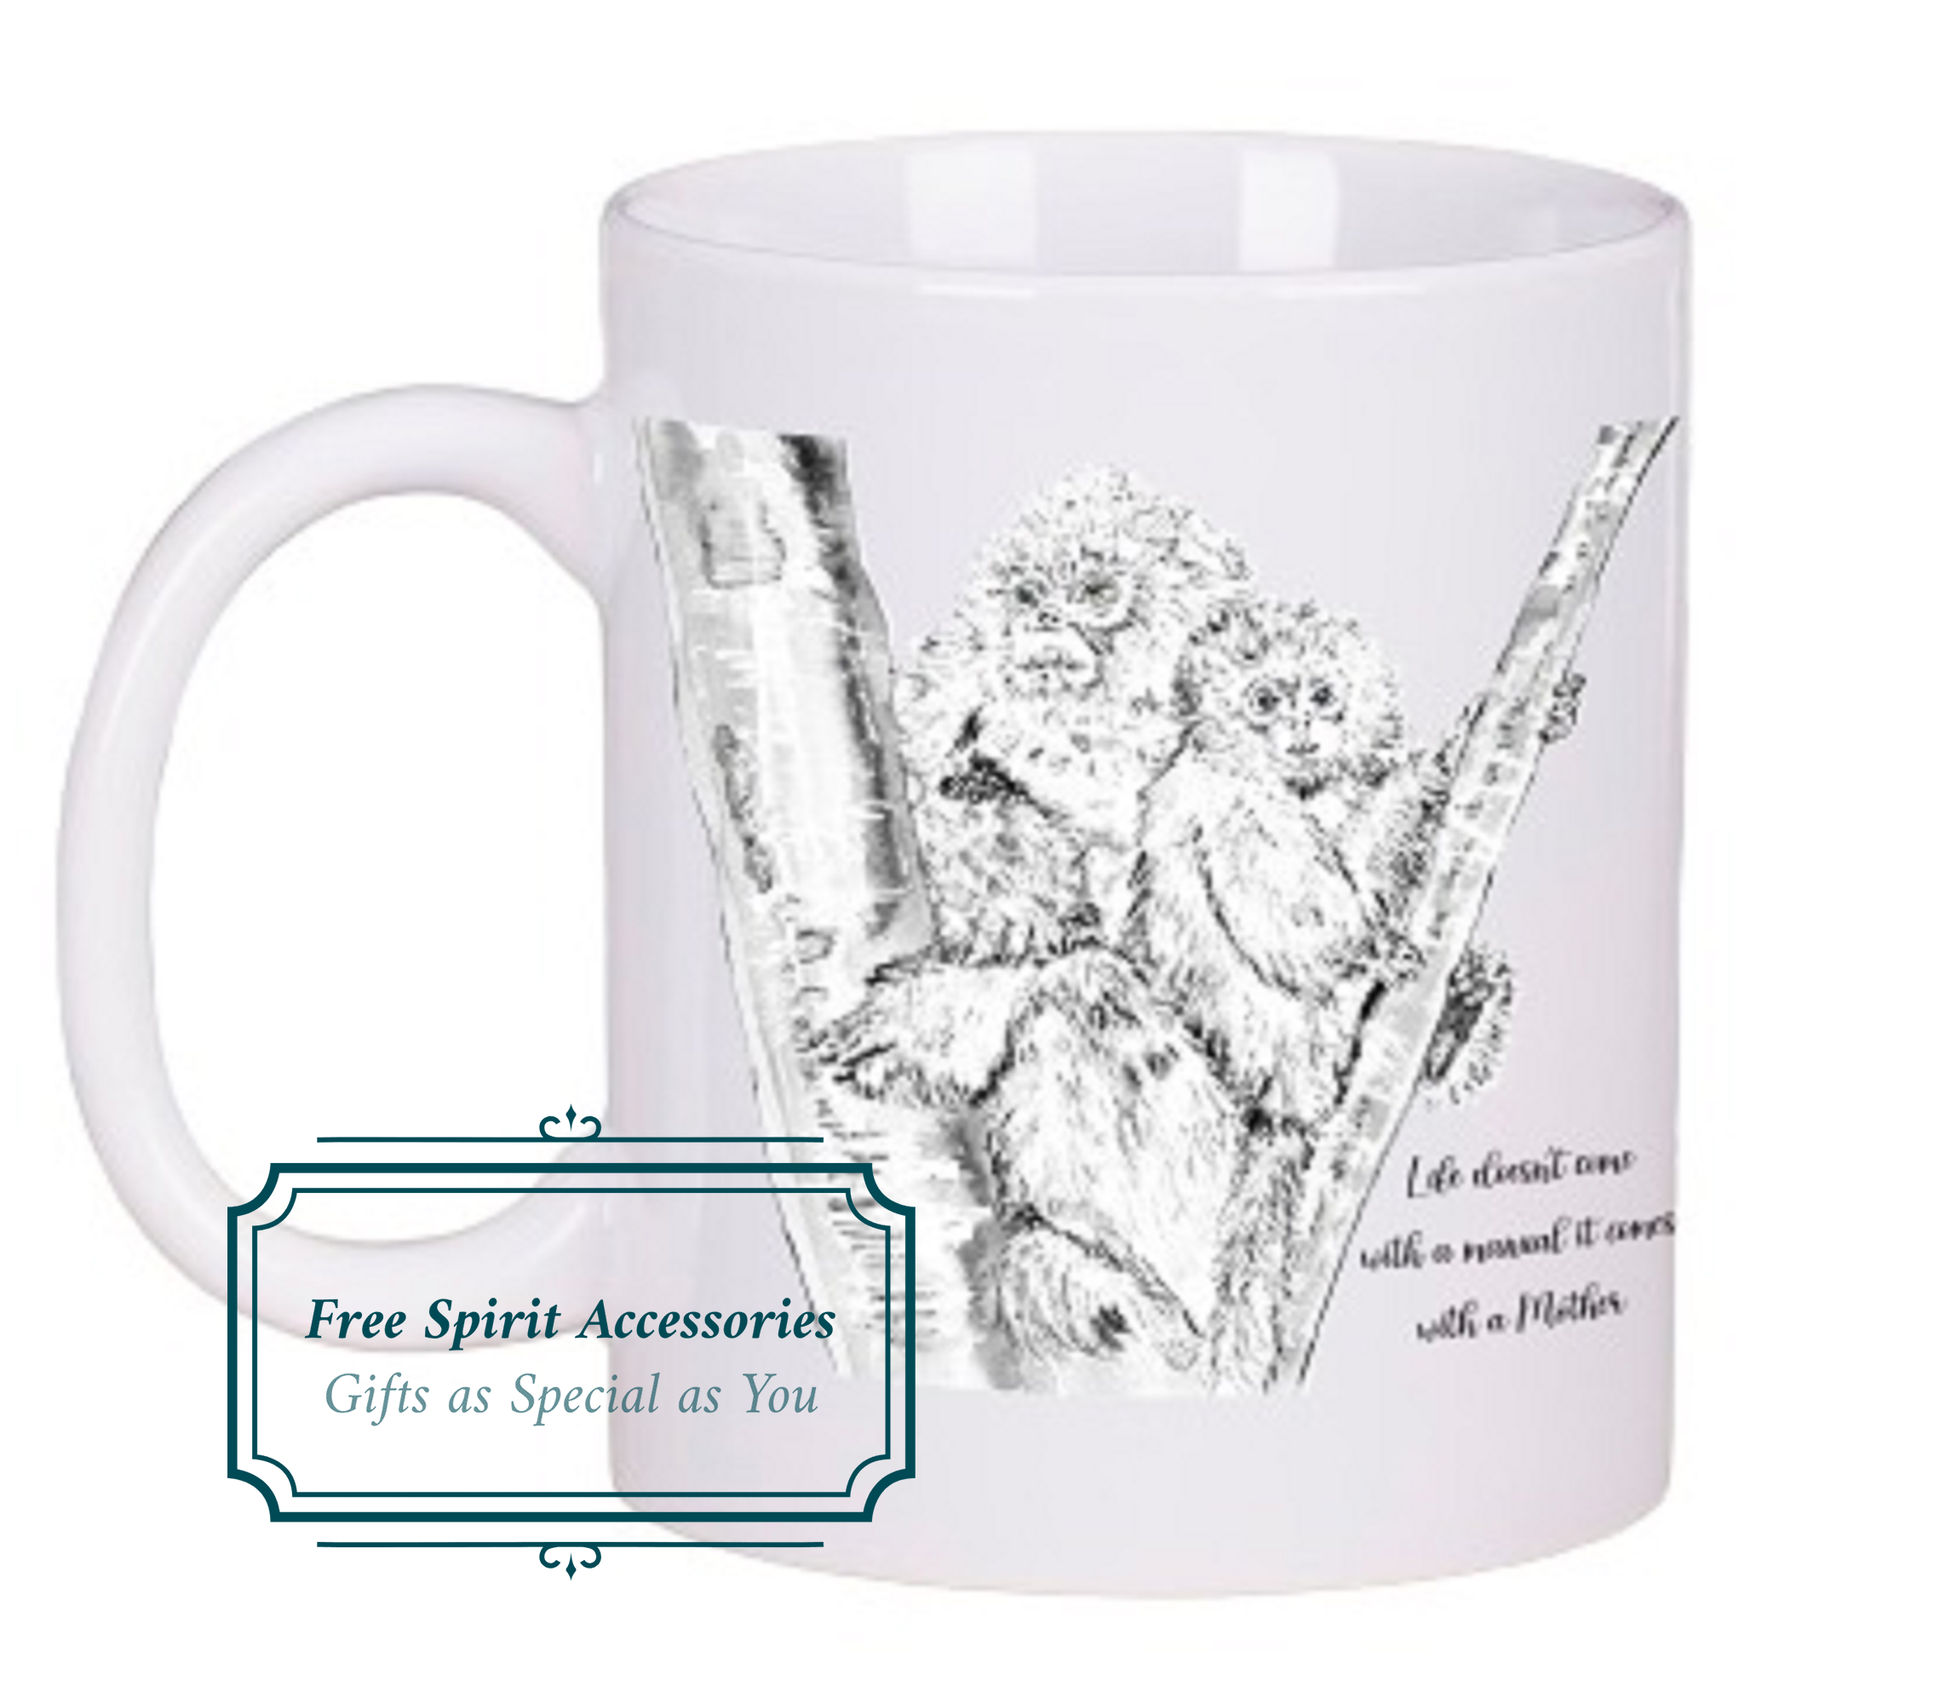  Beautiful Gibbons Mother Coffee Mug by Free Spirit Accessories sold by Free Spirit Accessories